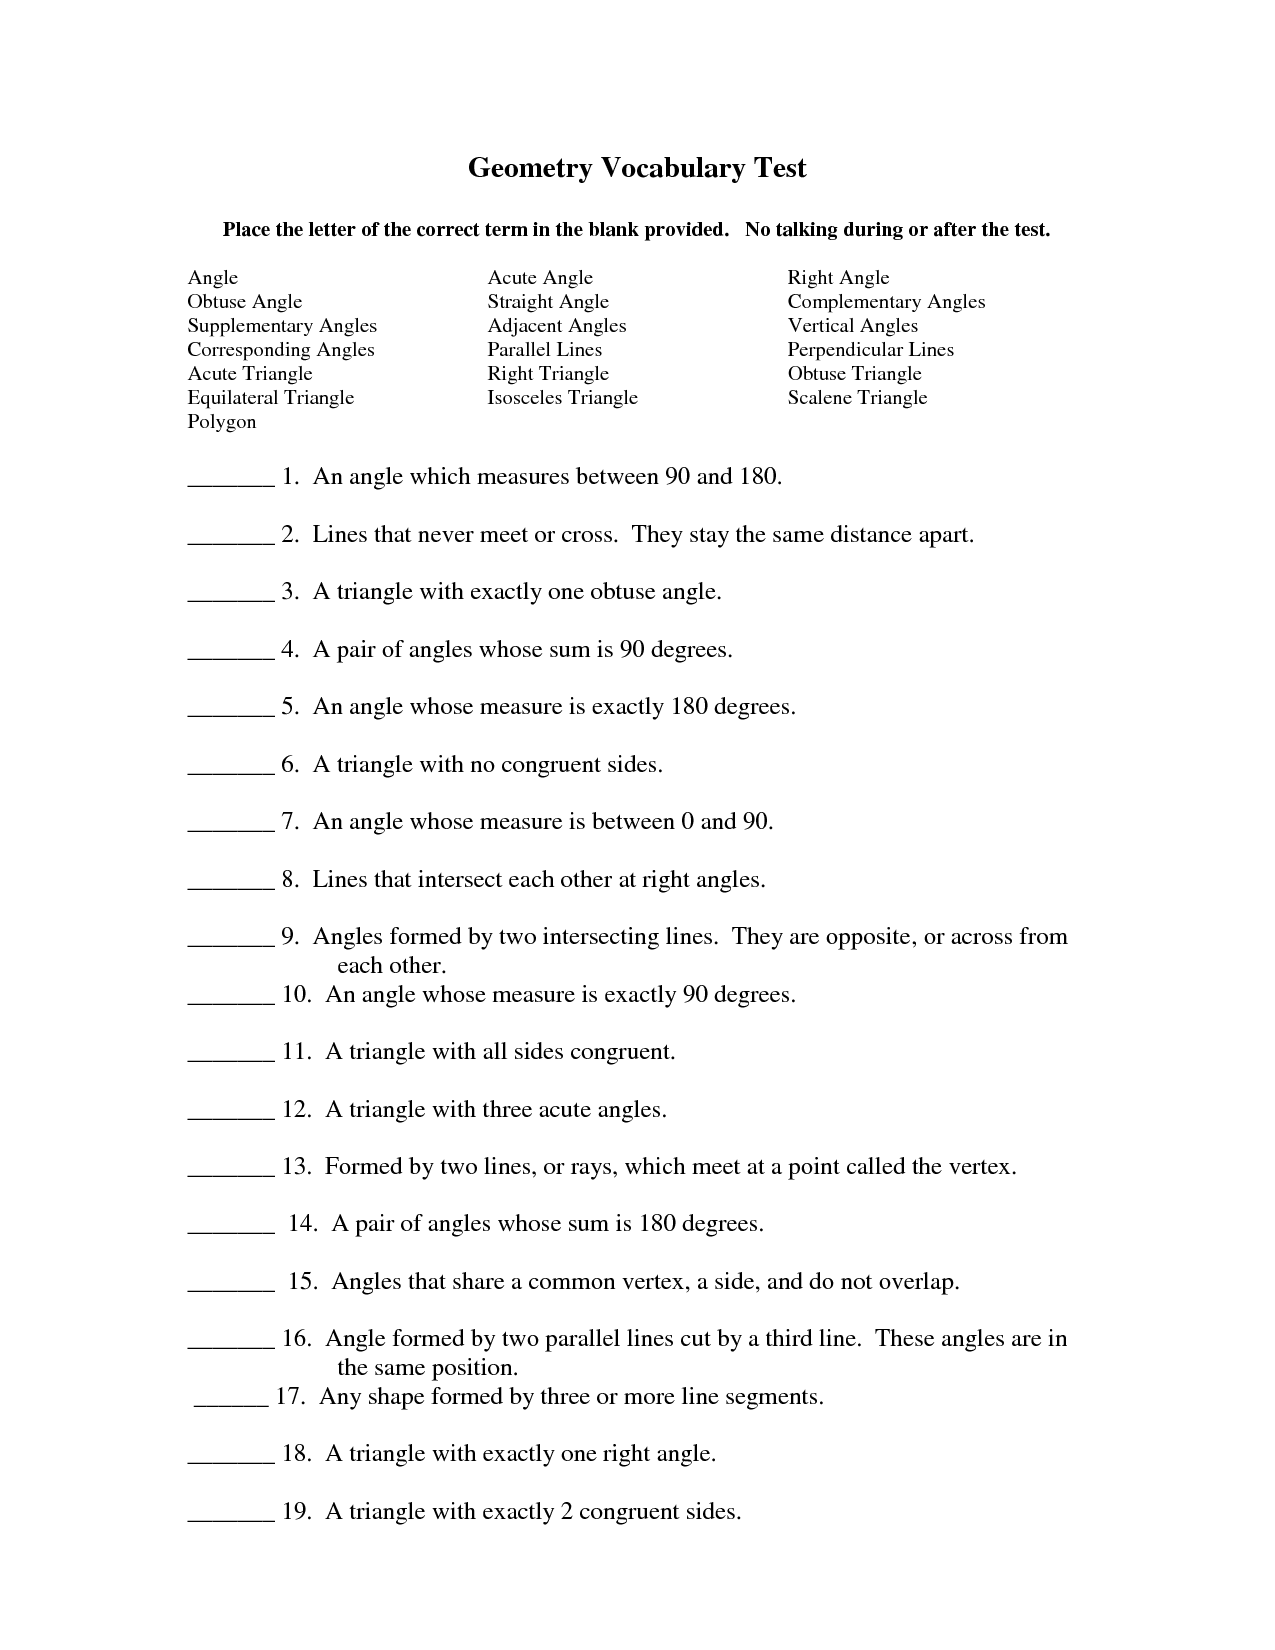 10-best-images-of-cloze-vocabulary-word-worksheets-3rd-grade-vocabulary-words-worksheets-3rd